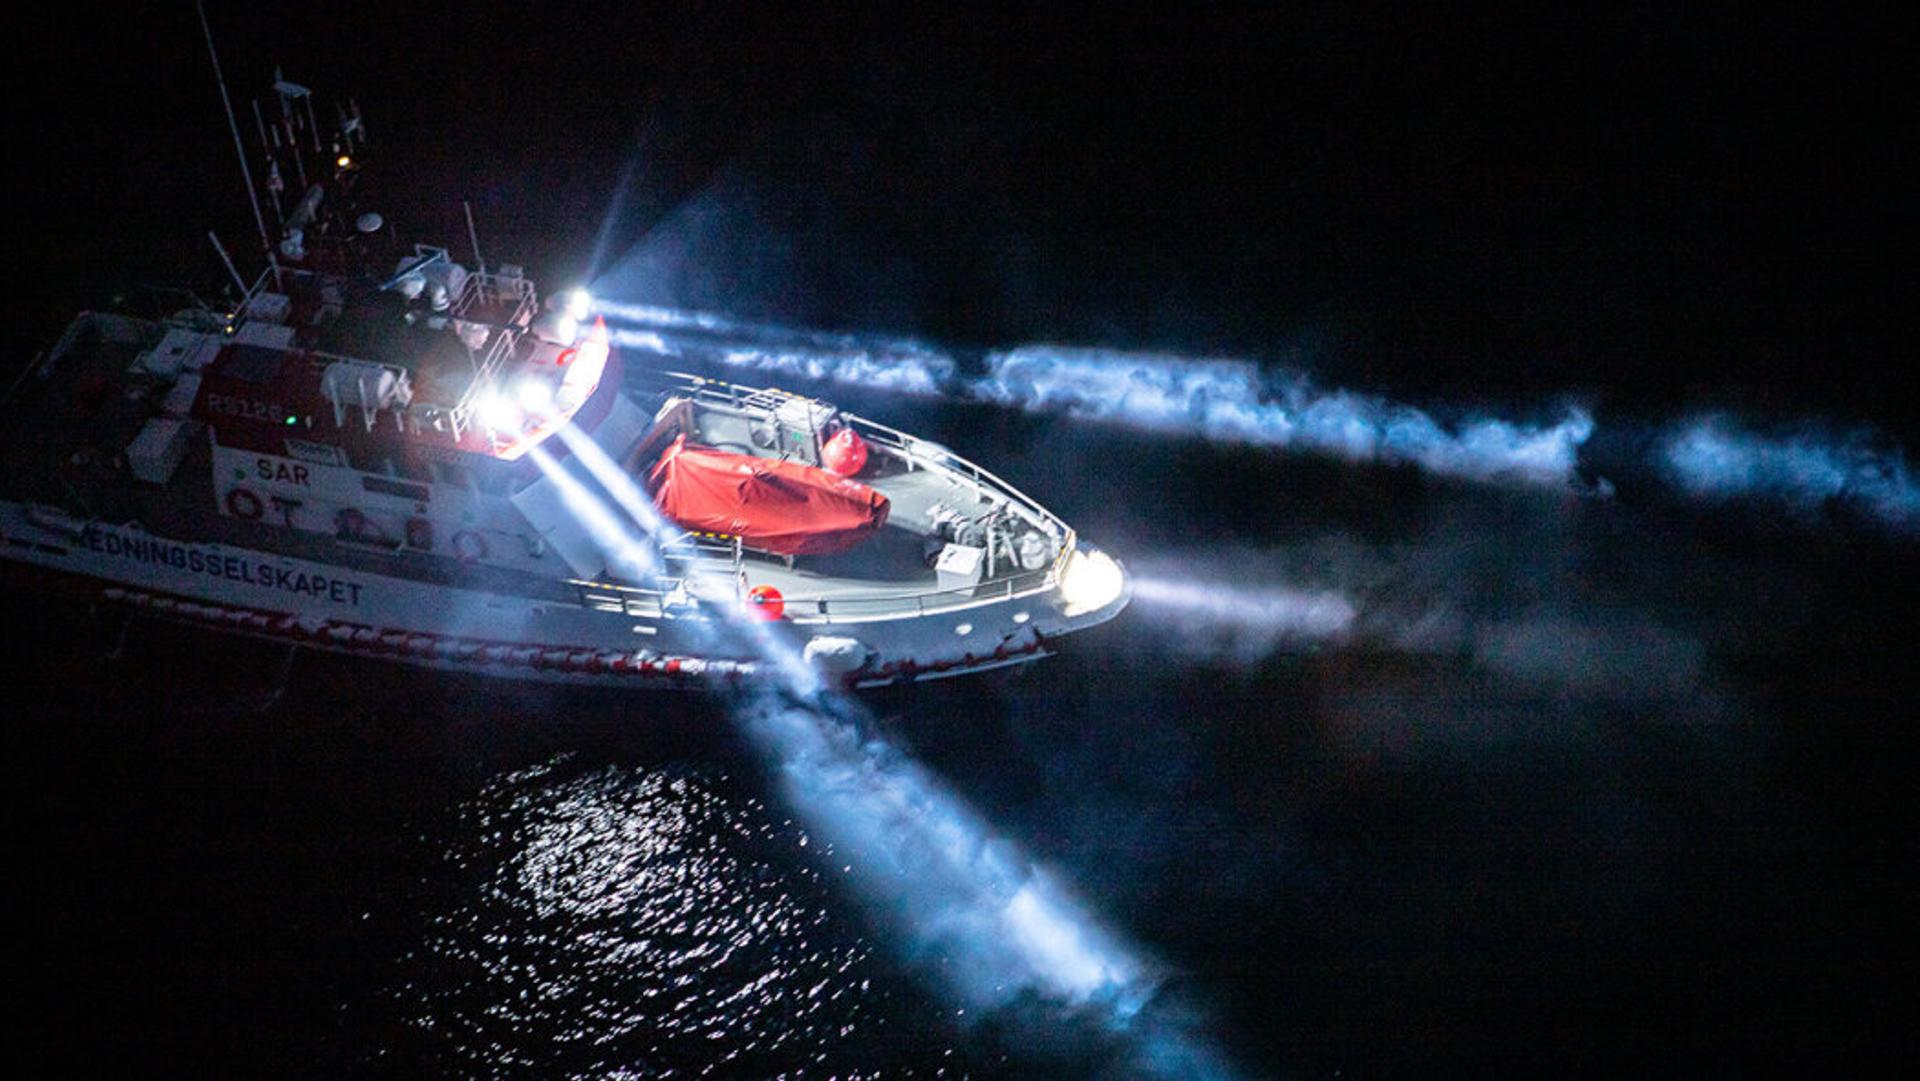 Boat with searchlights on in the dark